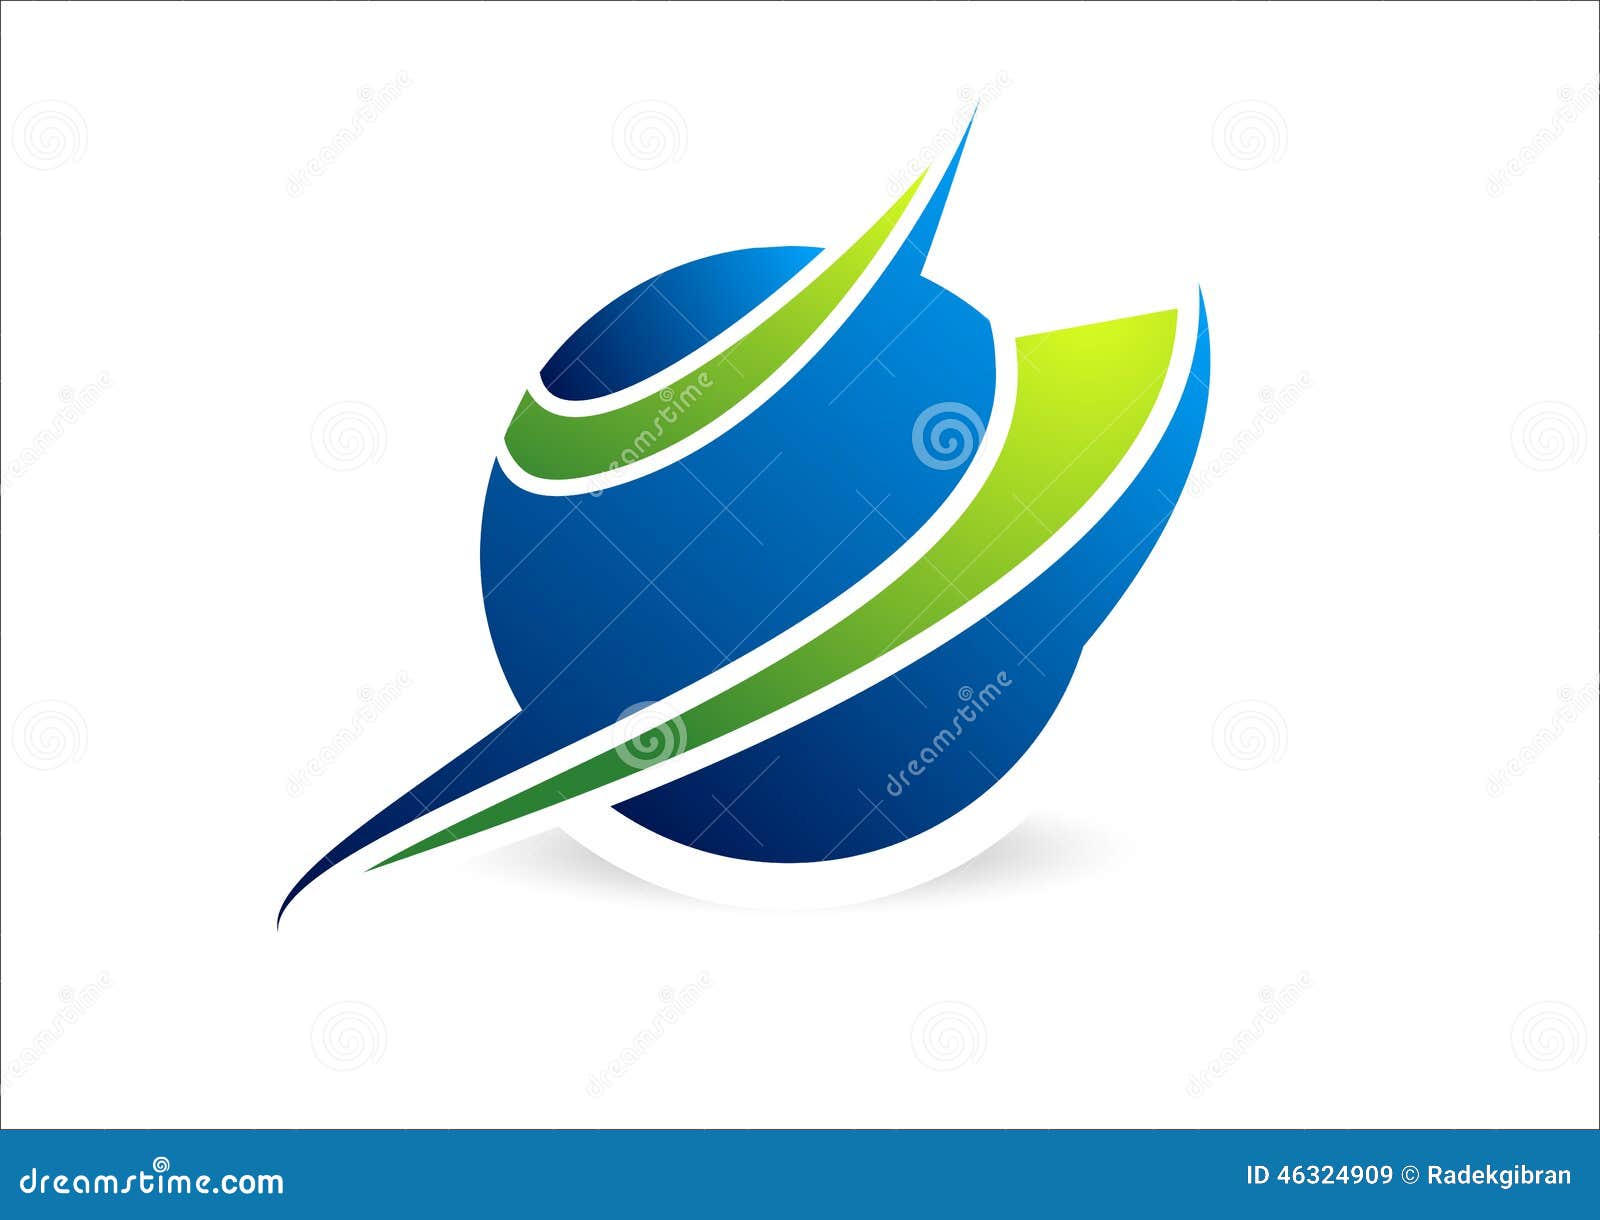 sphere,circle,logo,global,abstract,business,company,corporation,